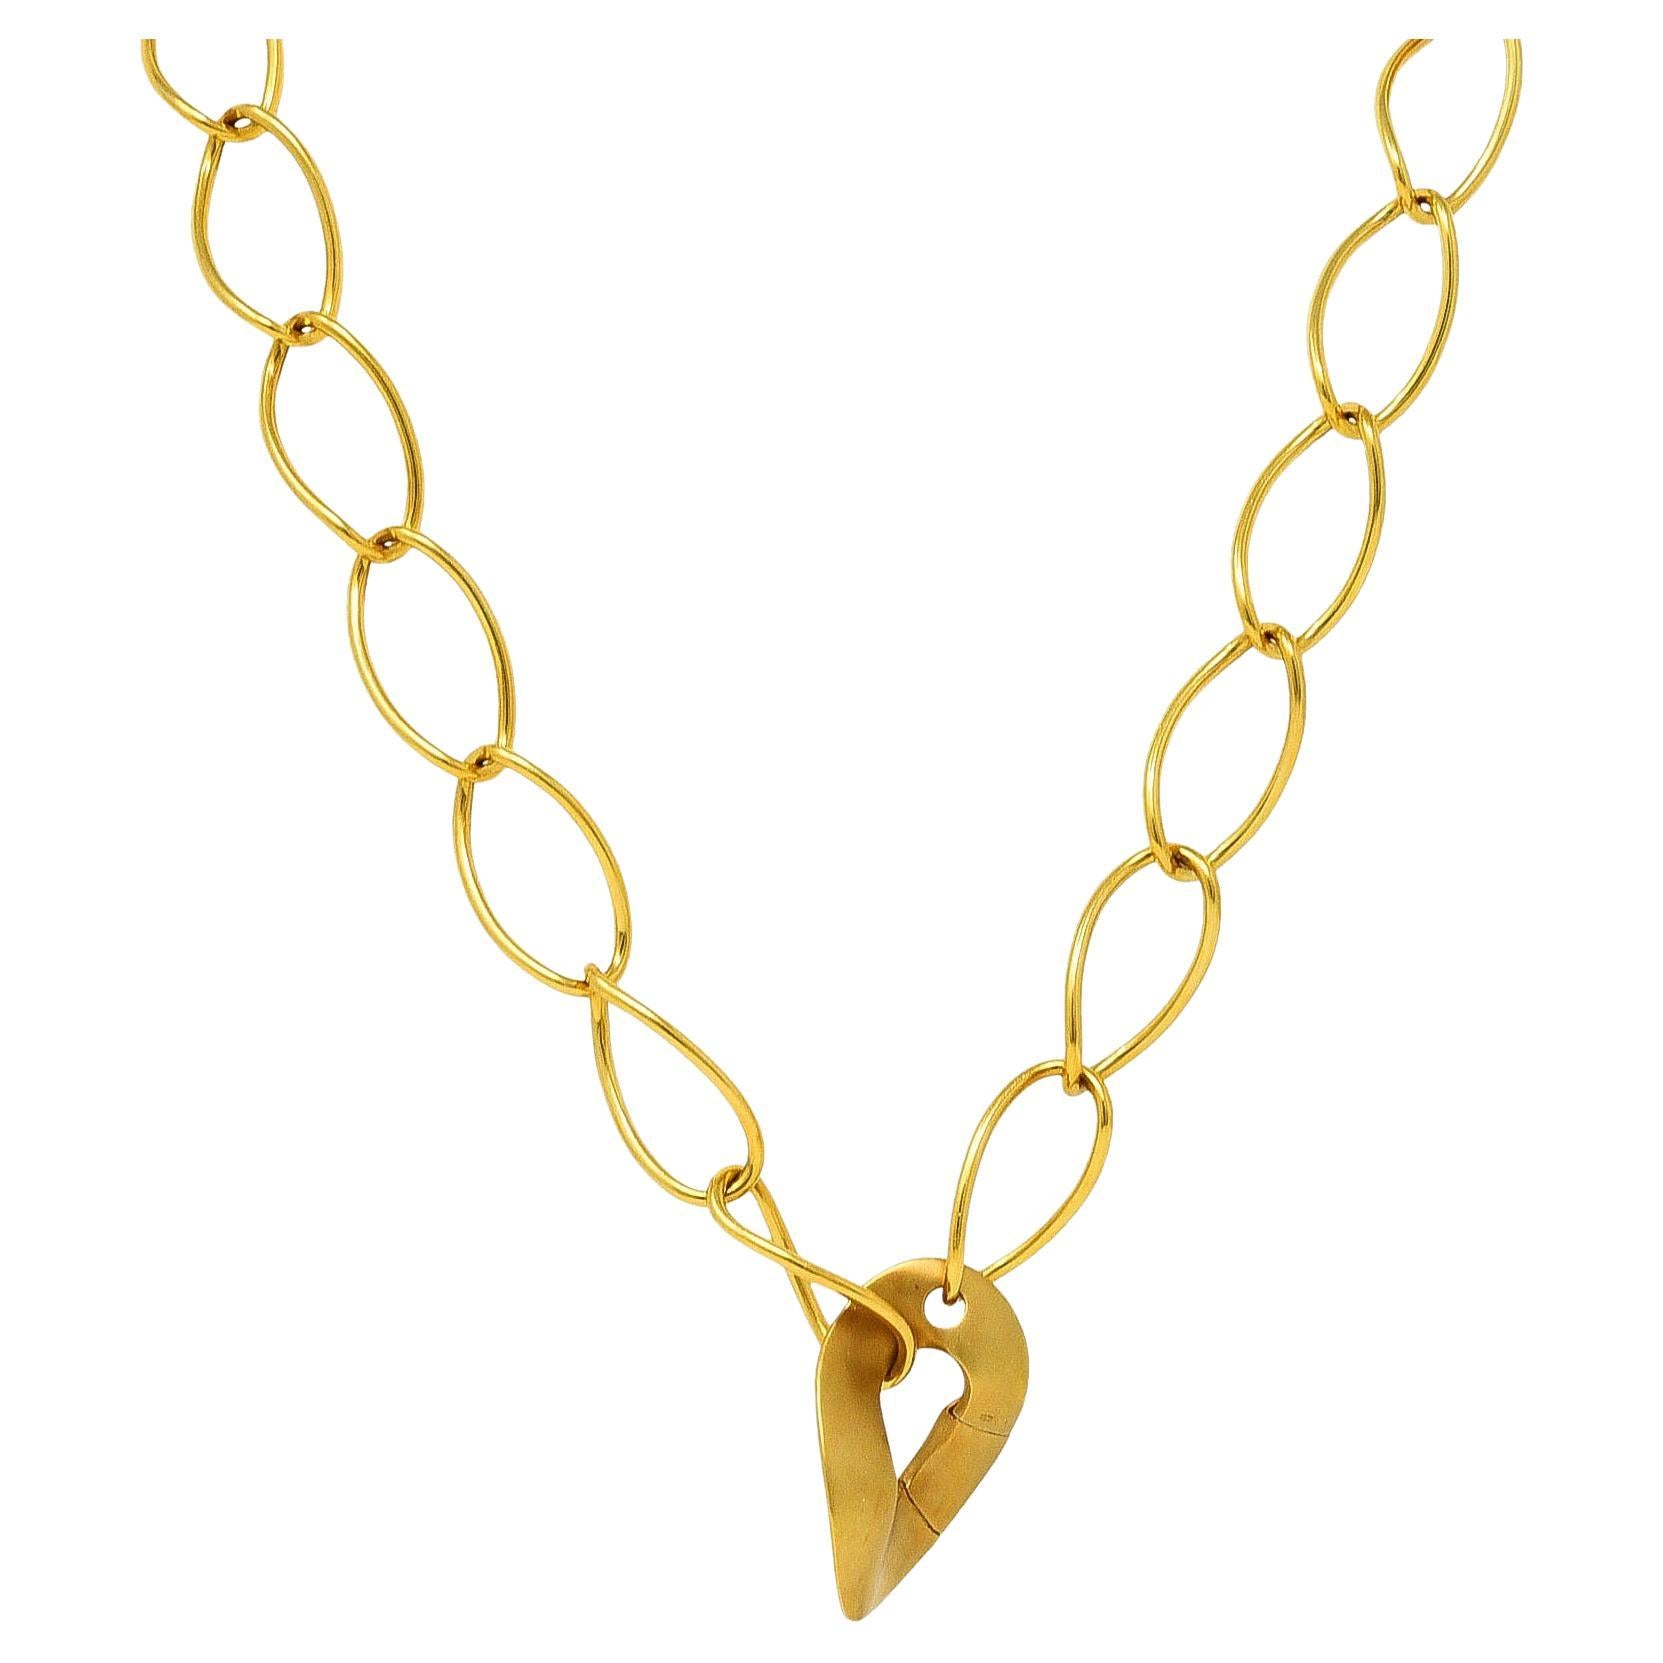 Pomellato Contemporary 18 Karat Yellow Gold Twisted Link Chain Necklace